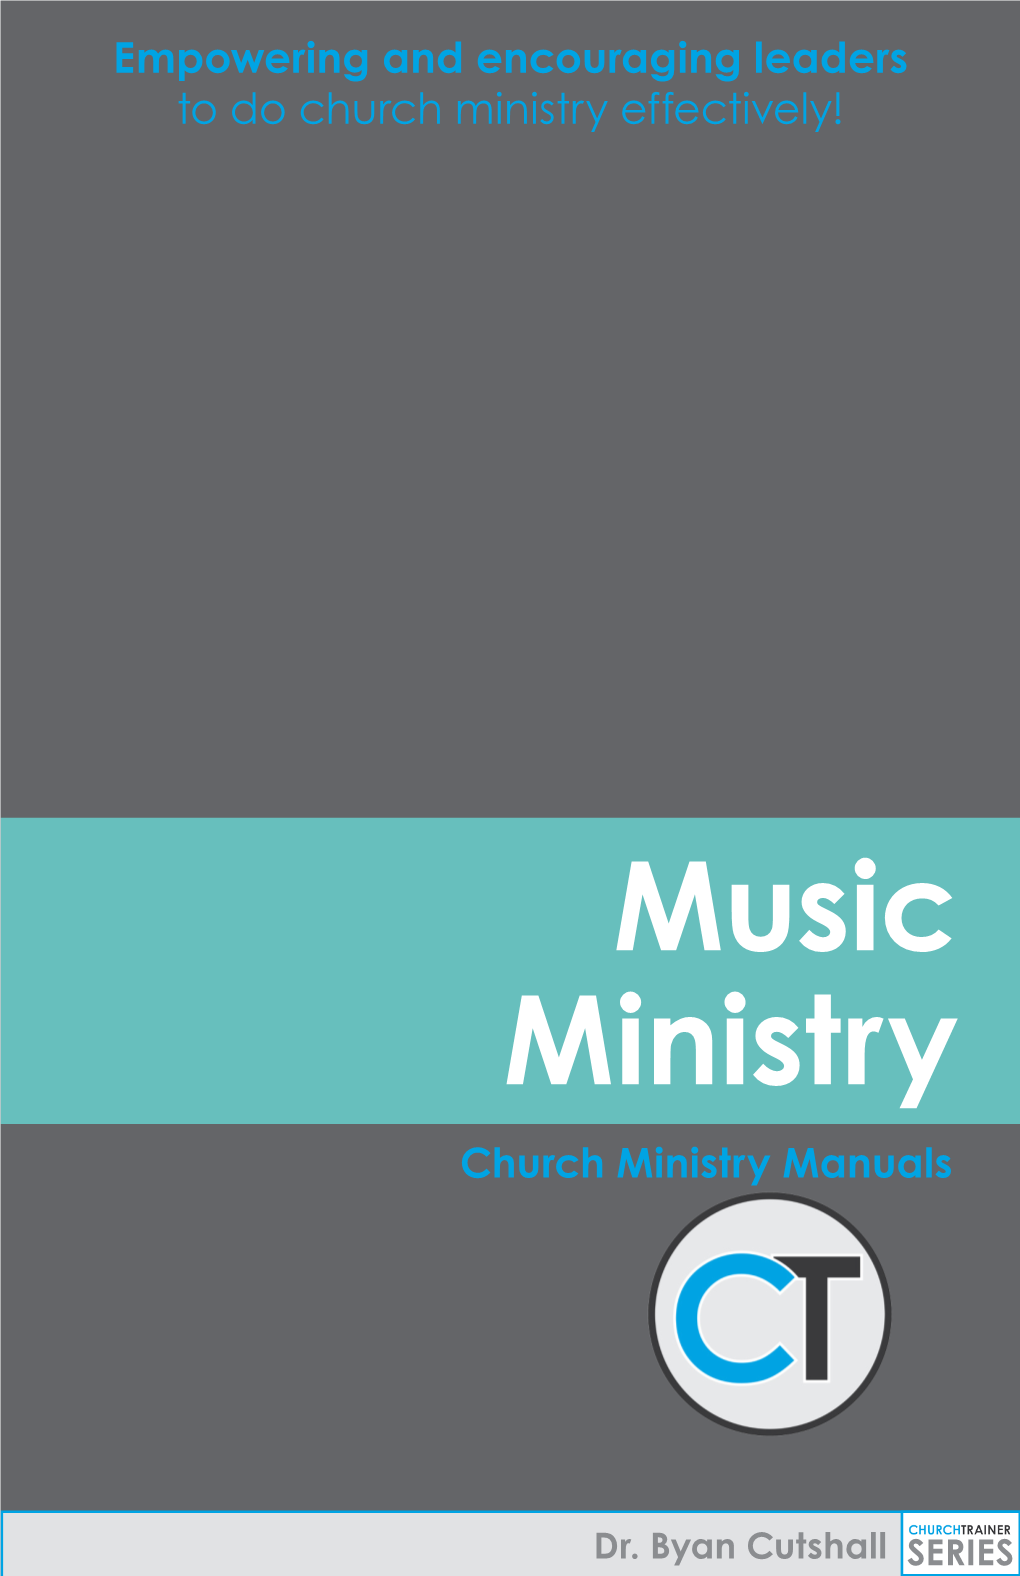 Music Ministry Church Ministry Manuals